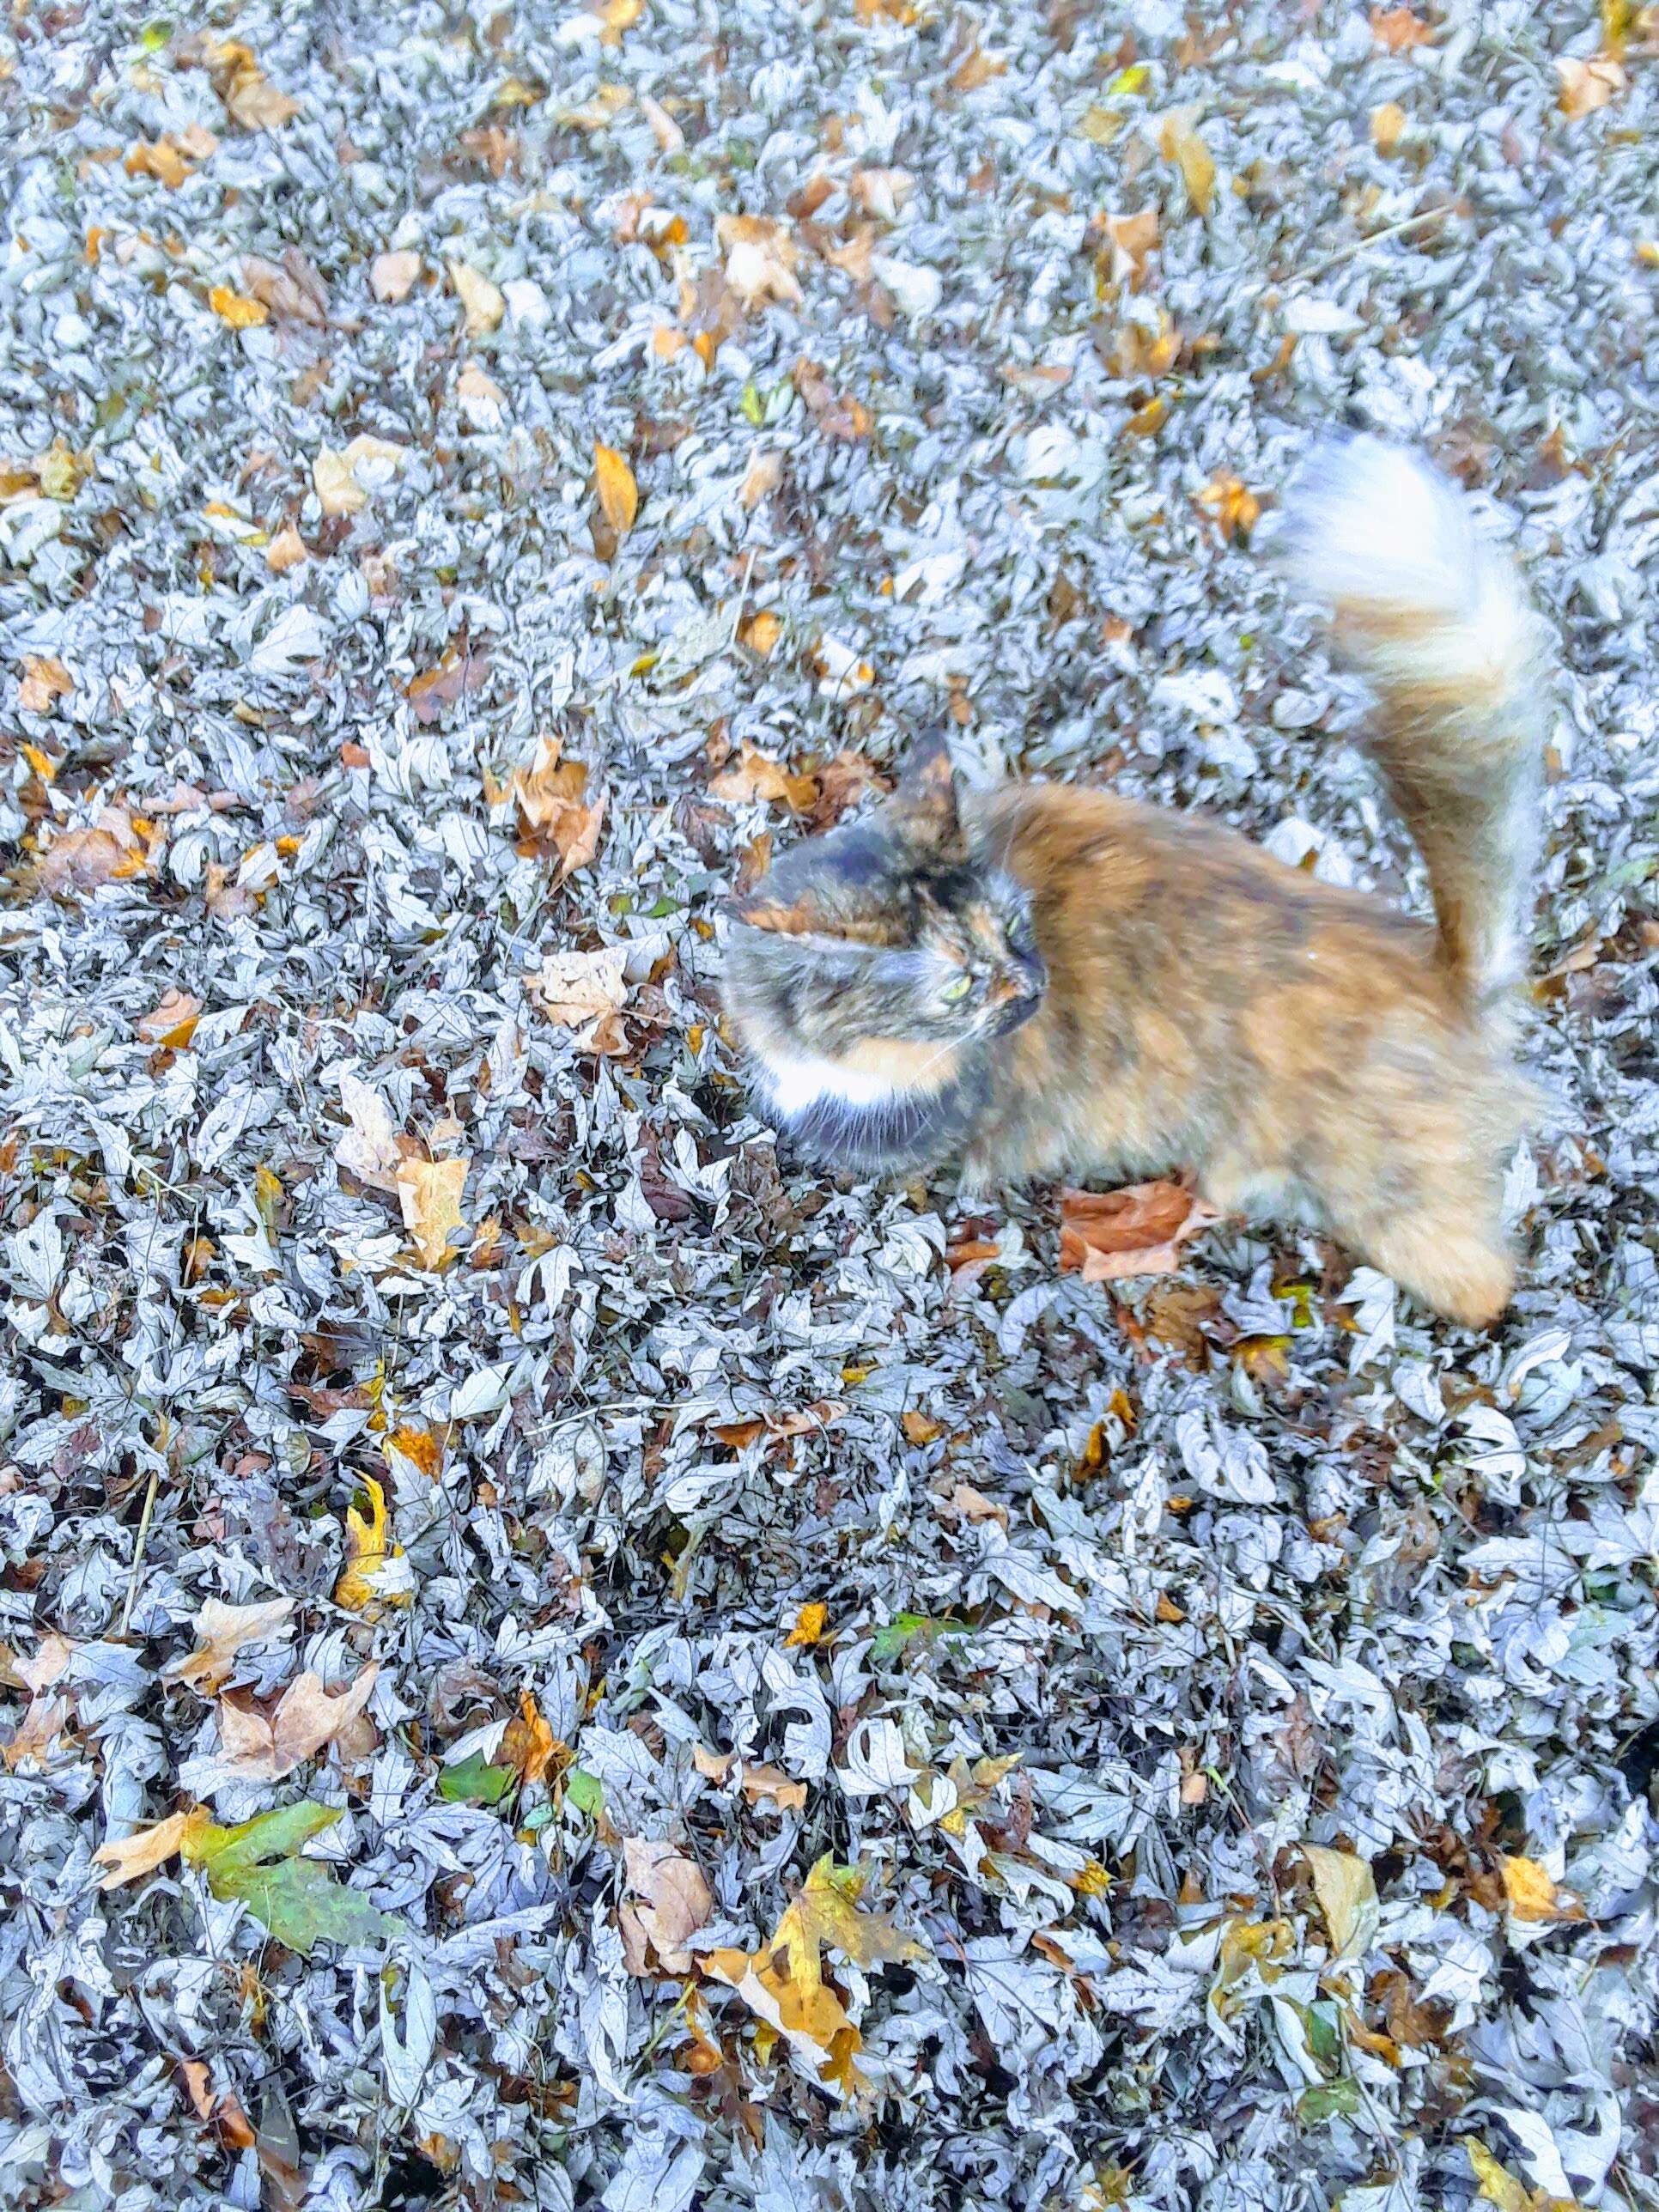 Lion the cat strolls through the leaves